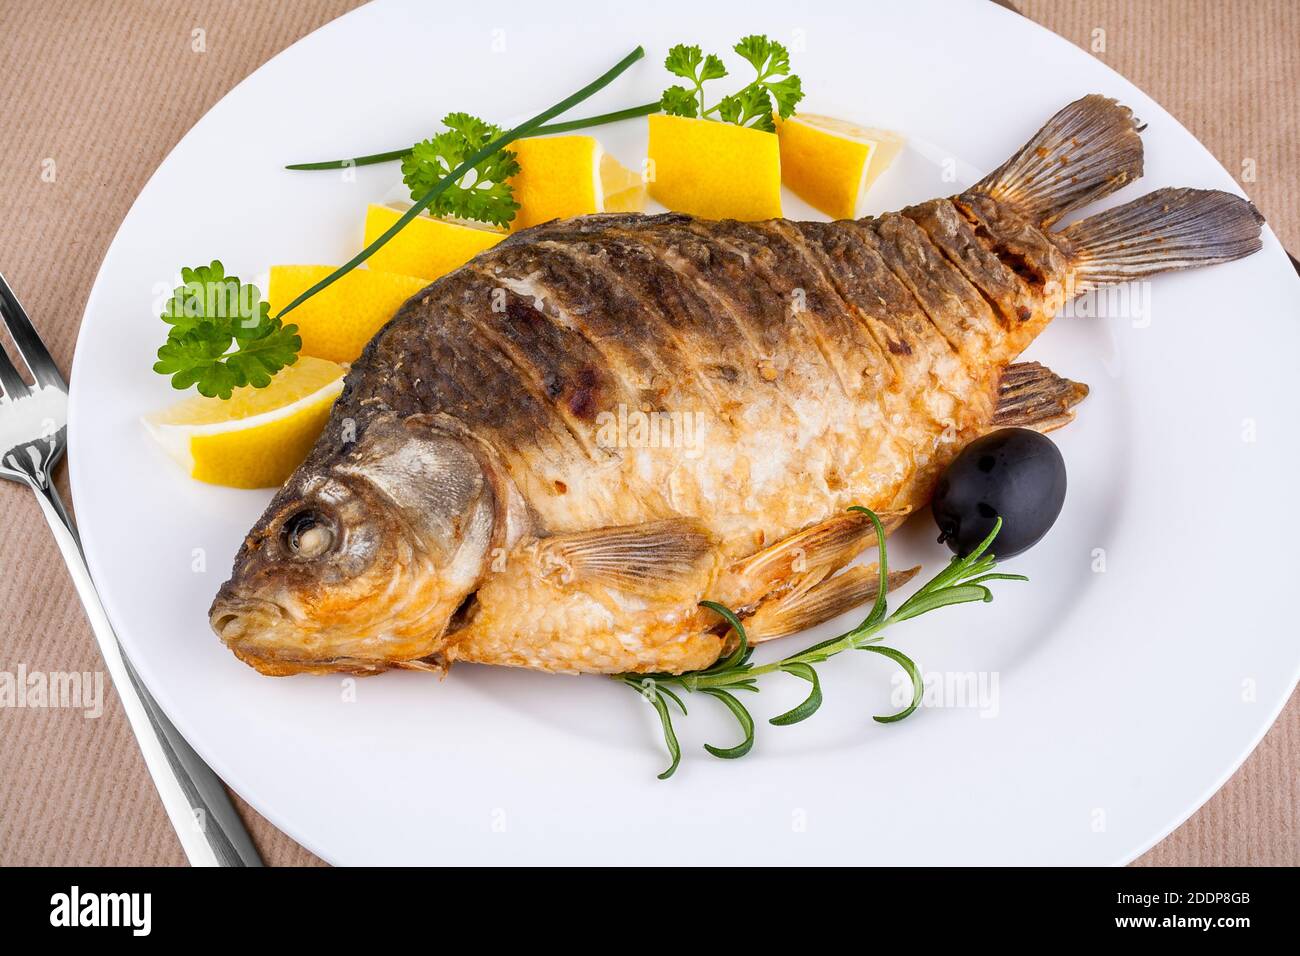 Fried fish on white plate with fork and knife, closeup Stock Photo